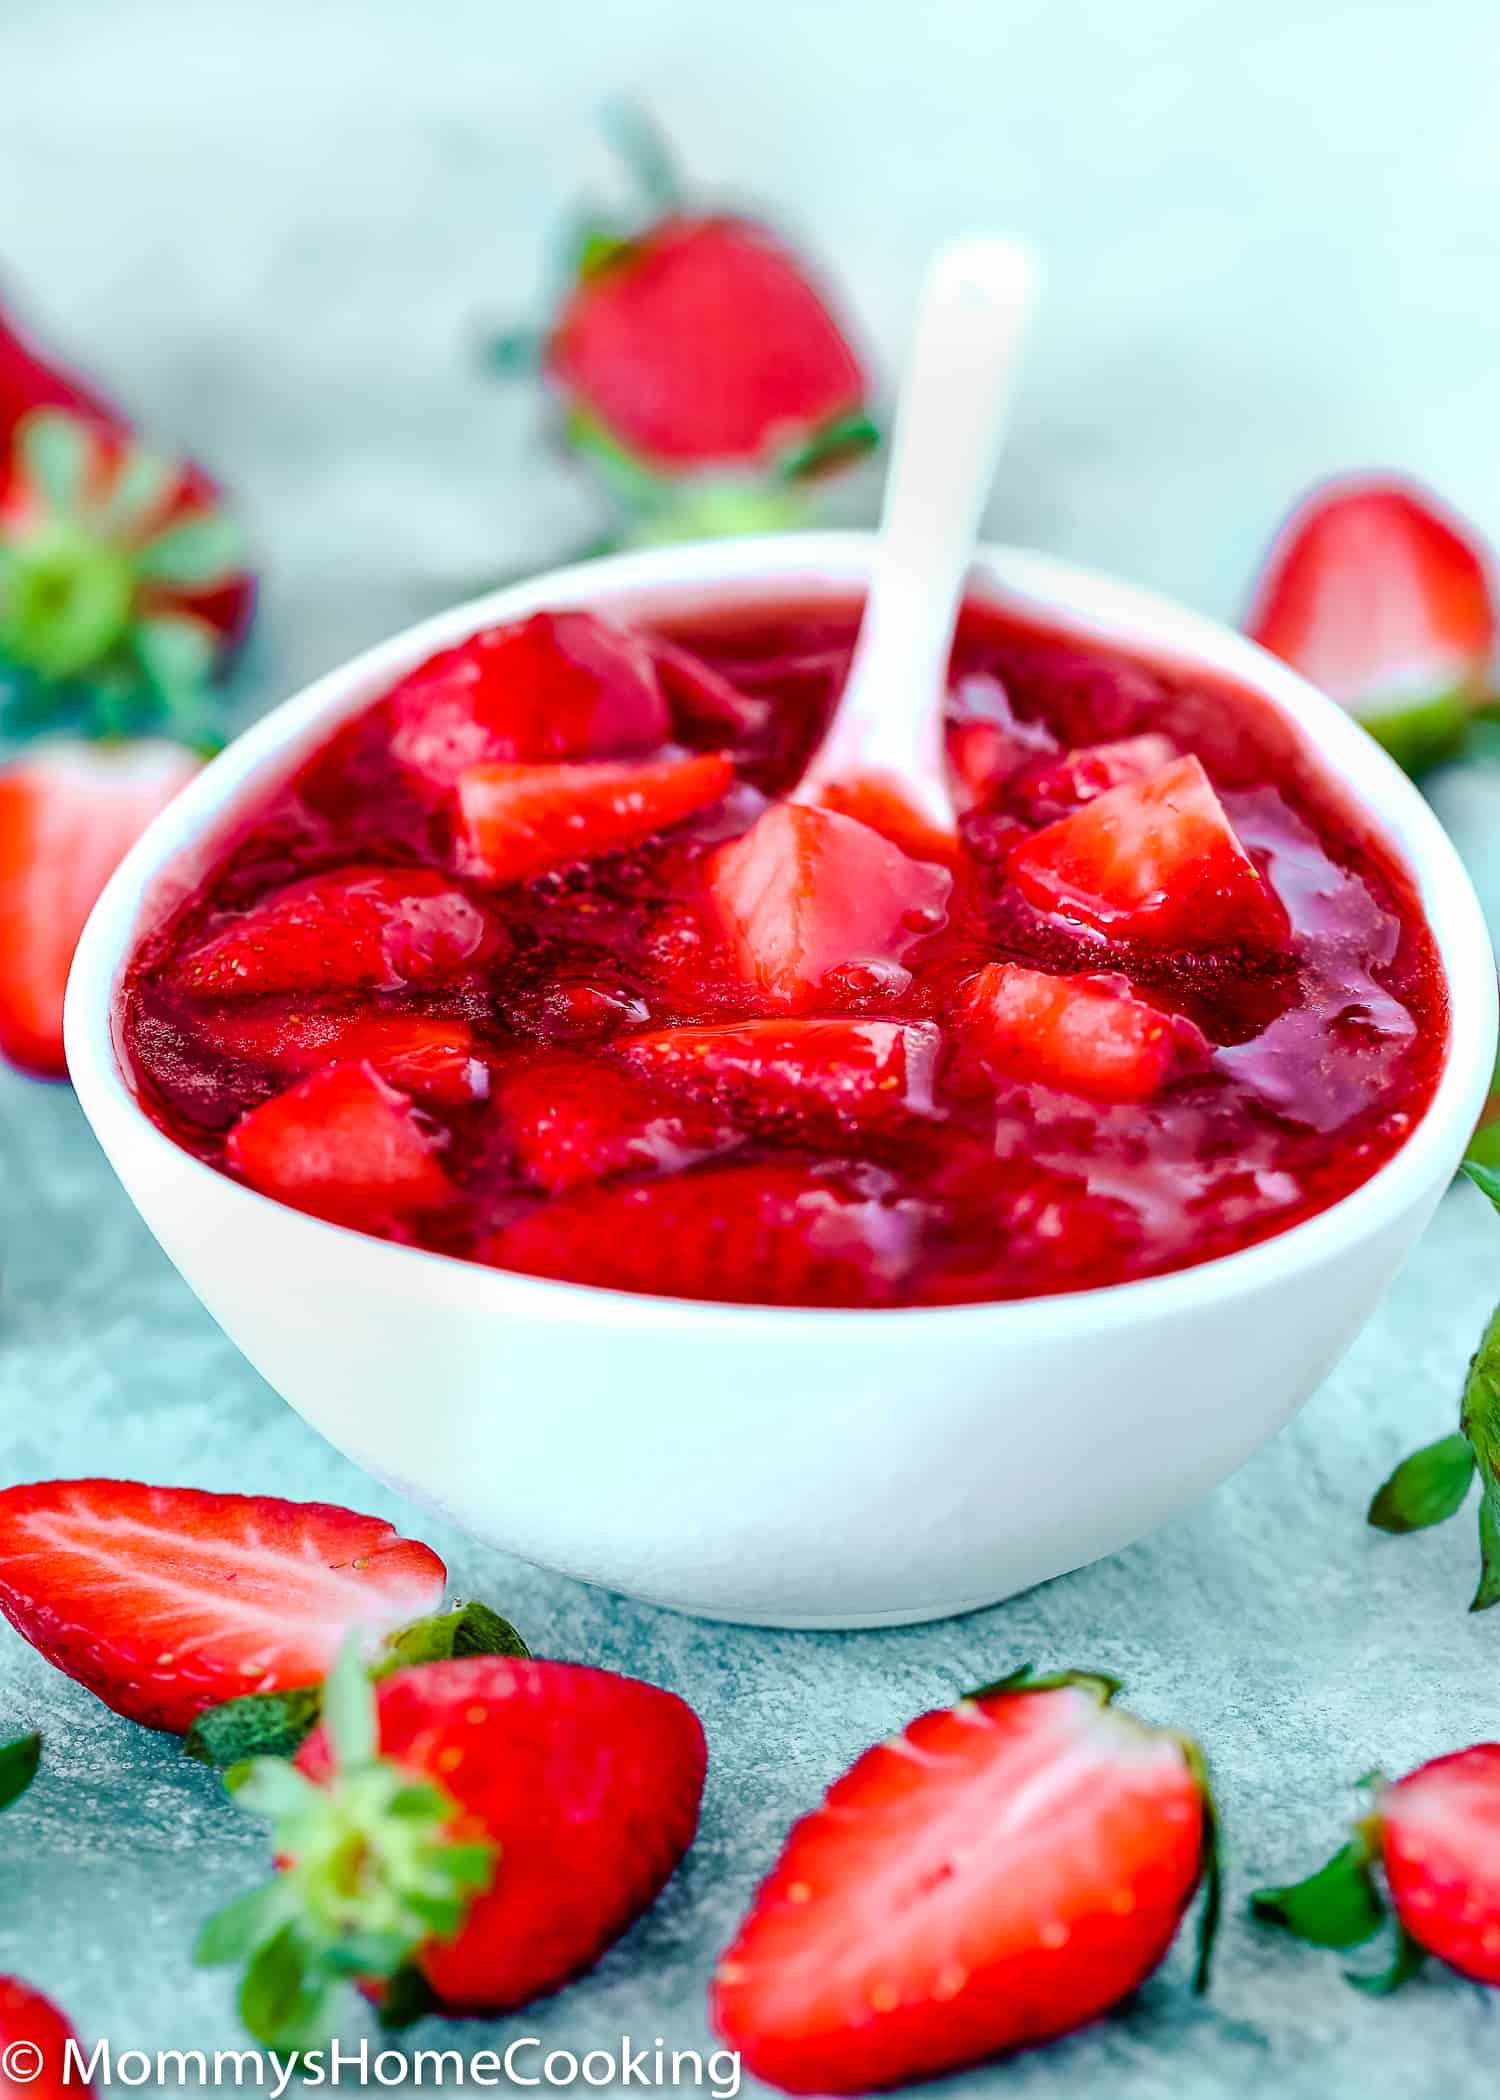 Strawberry sauce / topping in a white bowl and fresh strawberries